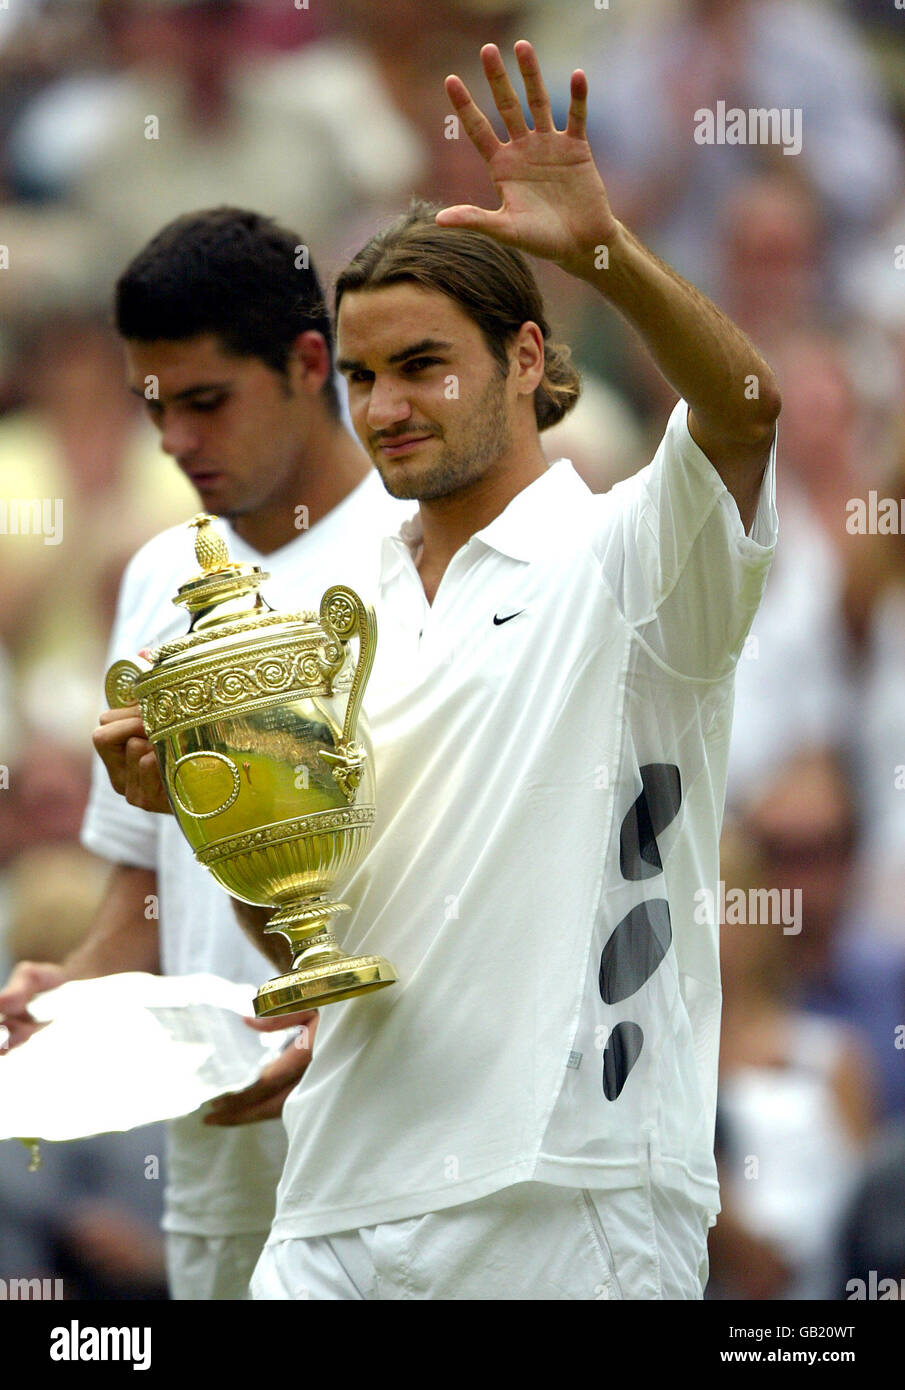 Tennis - Wimbledon 2003 - Men's Final - Mark Philippoussis v Roger Federer. Roger  Federer walks off with the winners cup as Mark Philippoussis looks on  dejected Stock Photo - Alamy